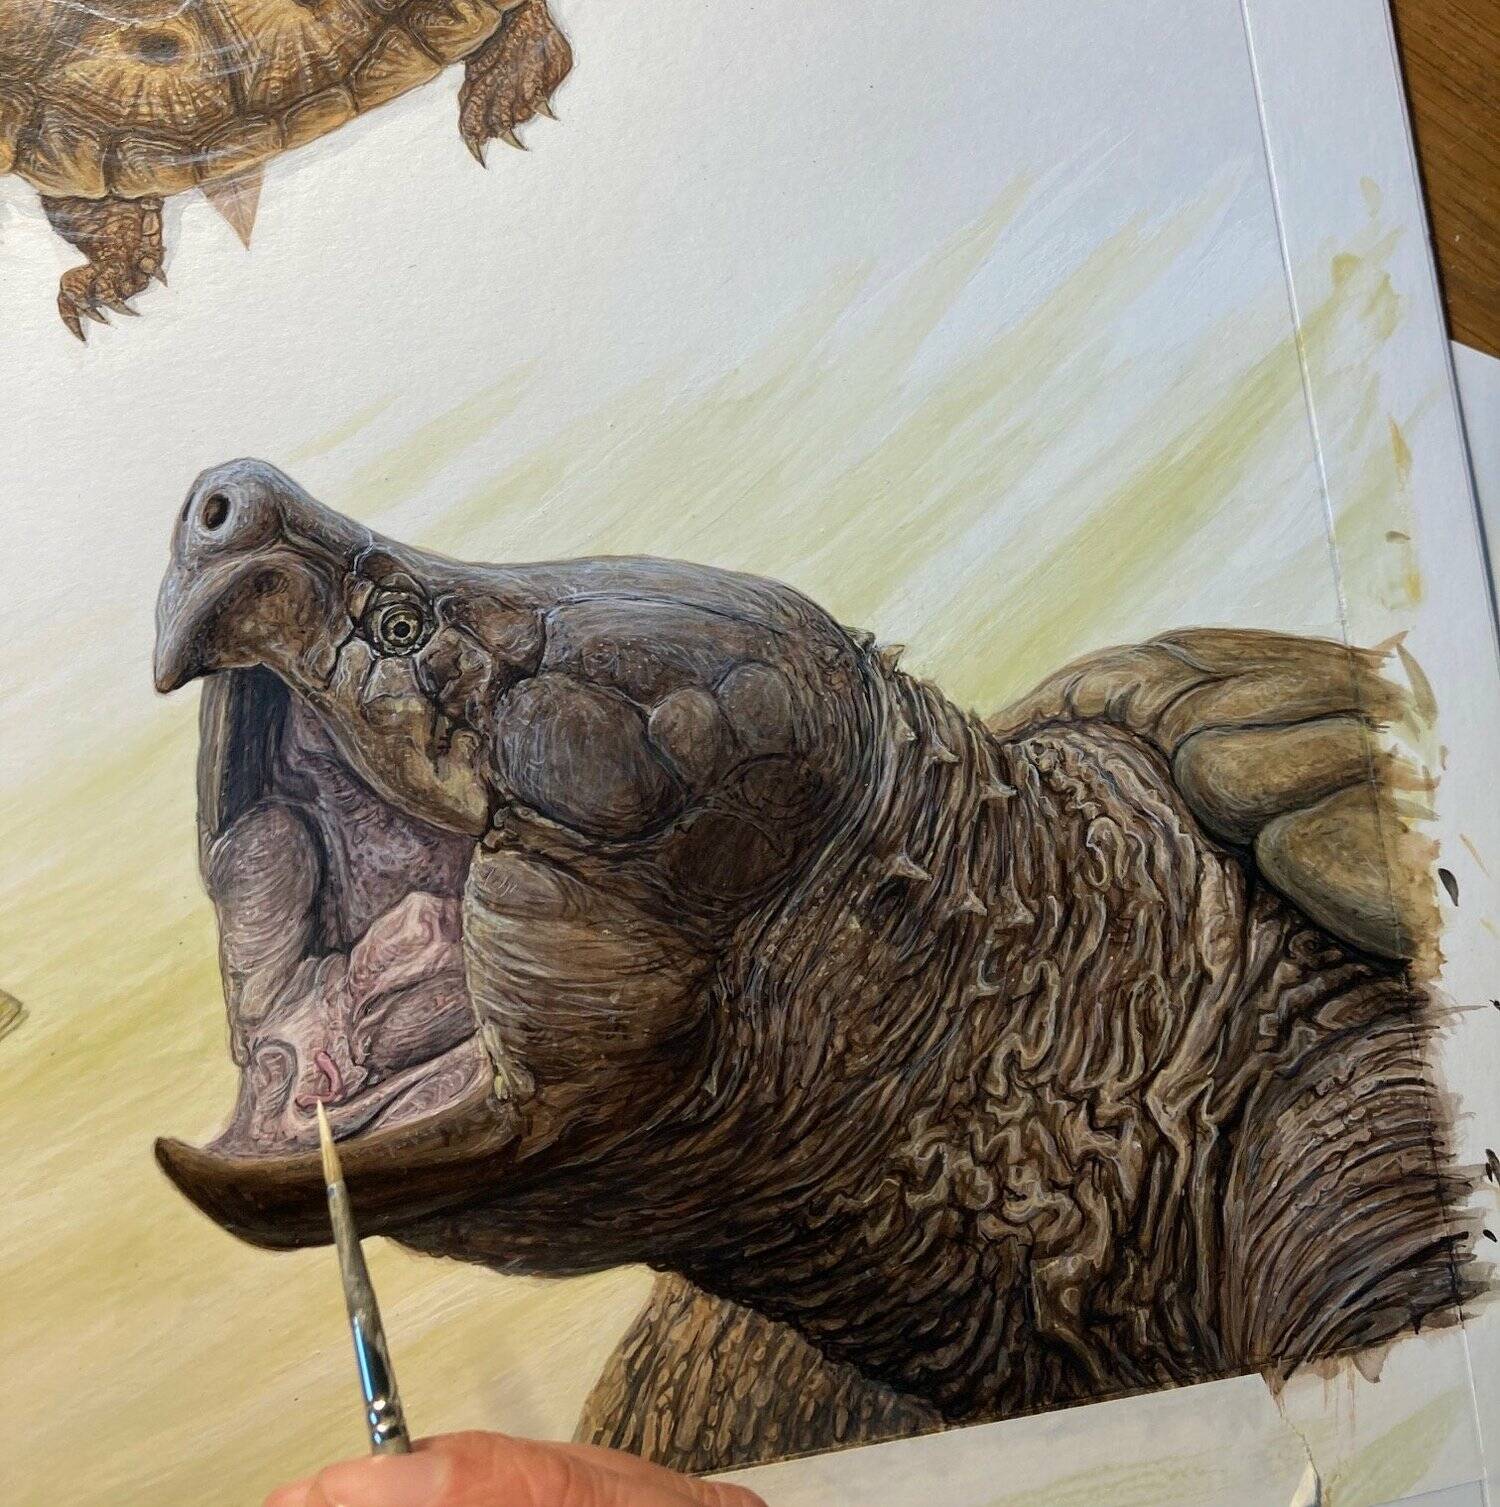 Photo courtesy of Matt Patterson / Matt Patterson works on an illustration of “The Book of Turtles,” a collaboration with Sy Montgomery, a New York Times bestselling science writer.